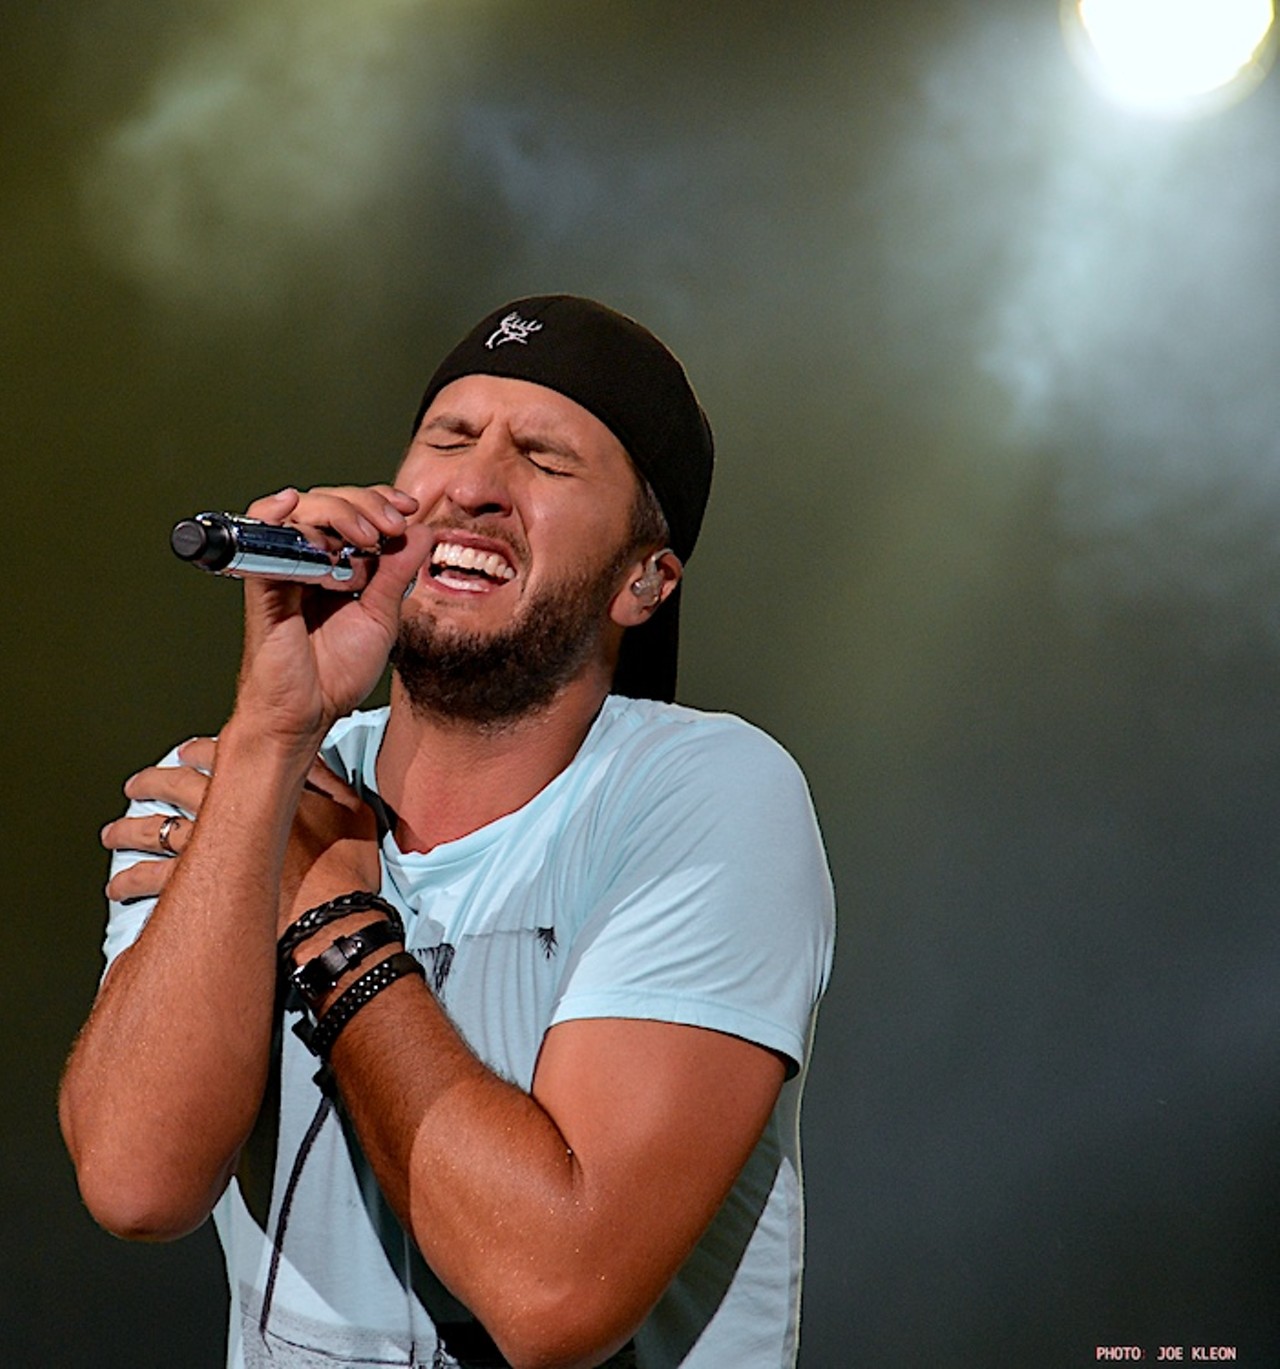 Luke Bryan, Lee Brice and Cole Swindell Performing at Blossom